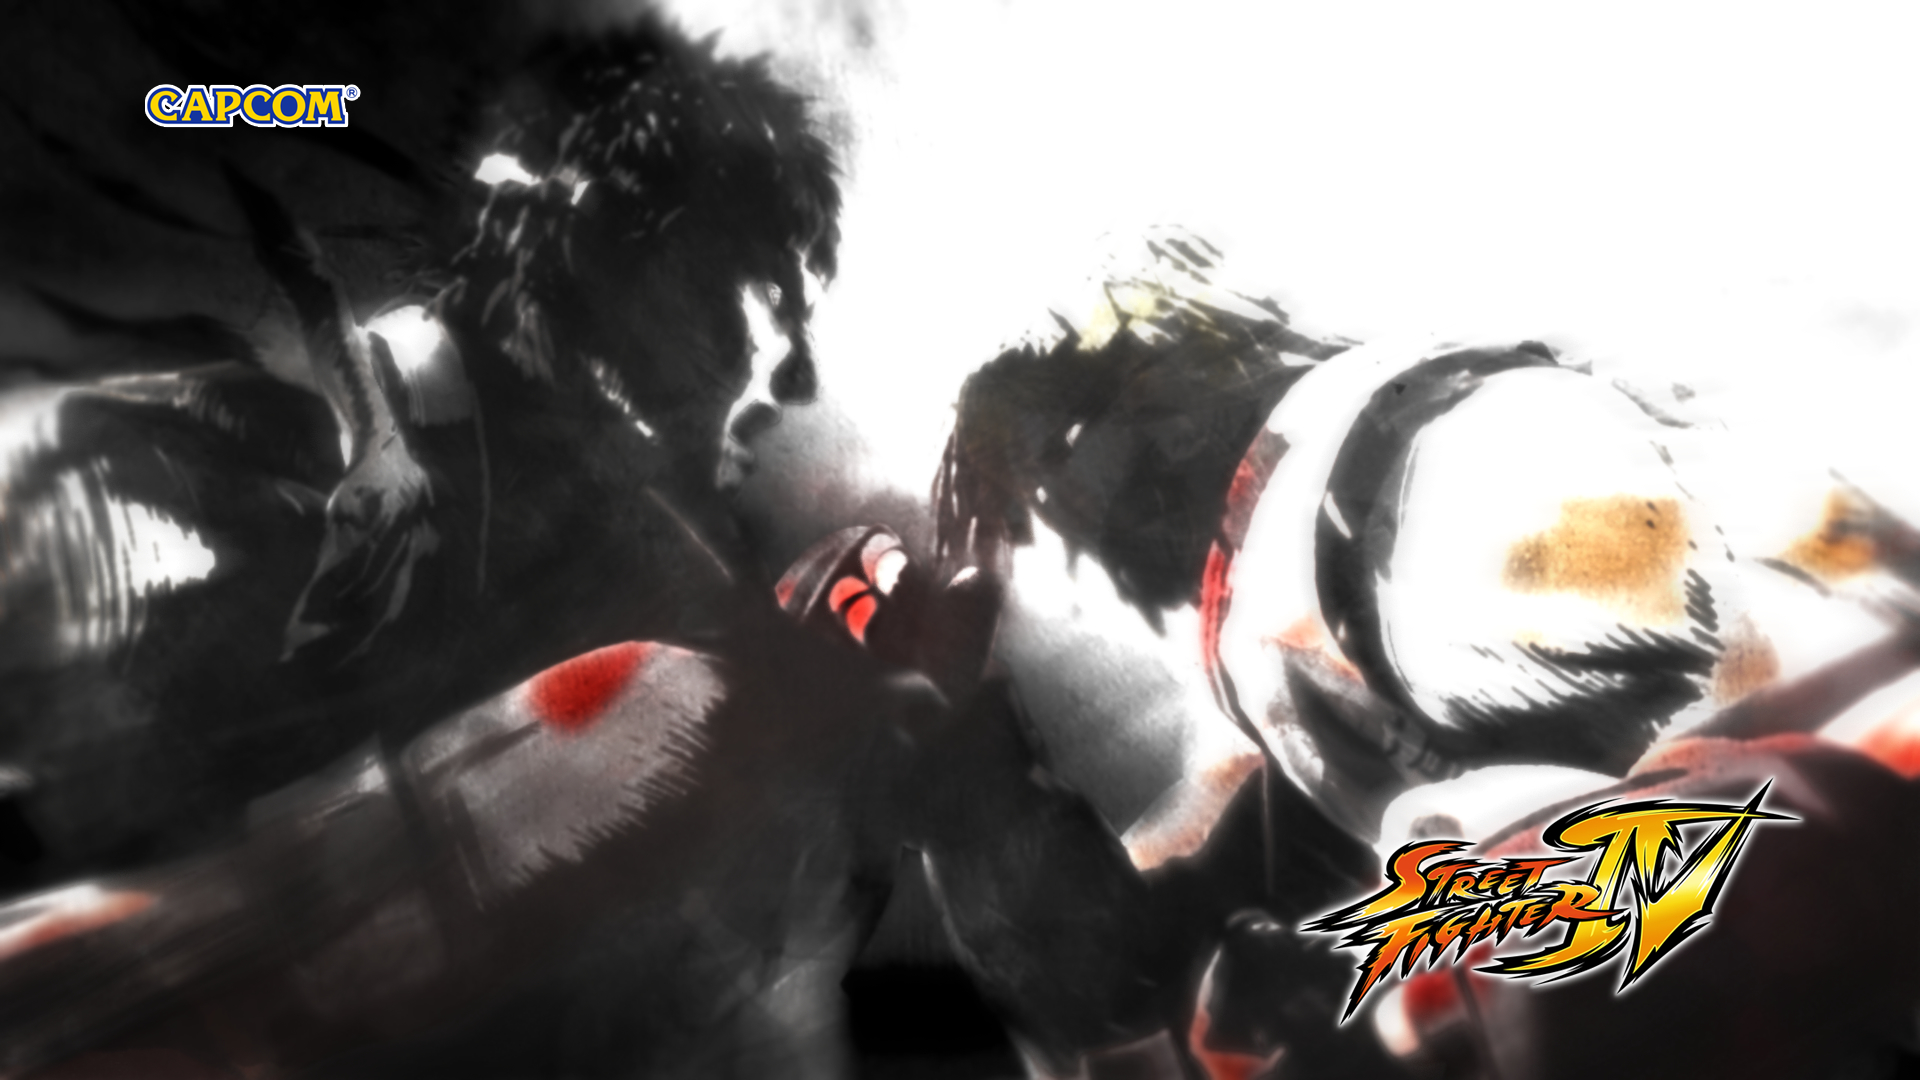 Street Fighter Wallpaper HD Game High Quality Anime